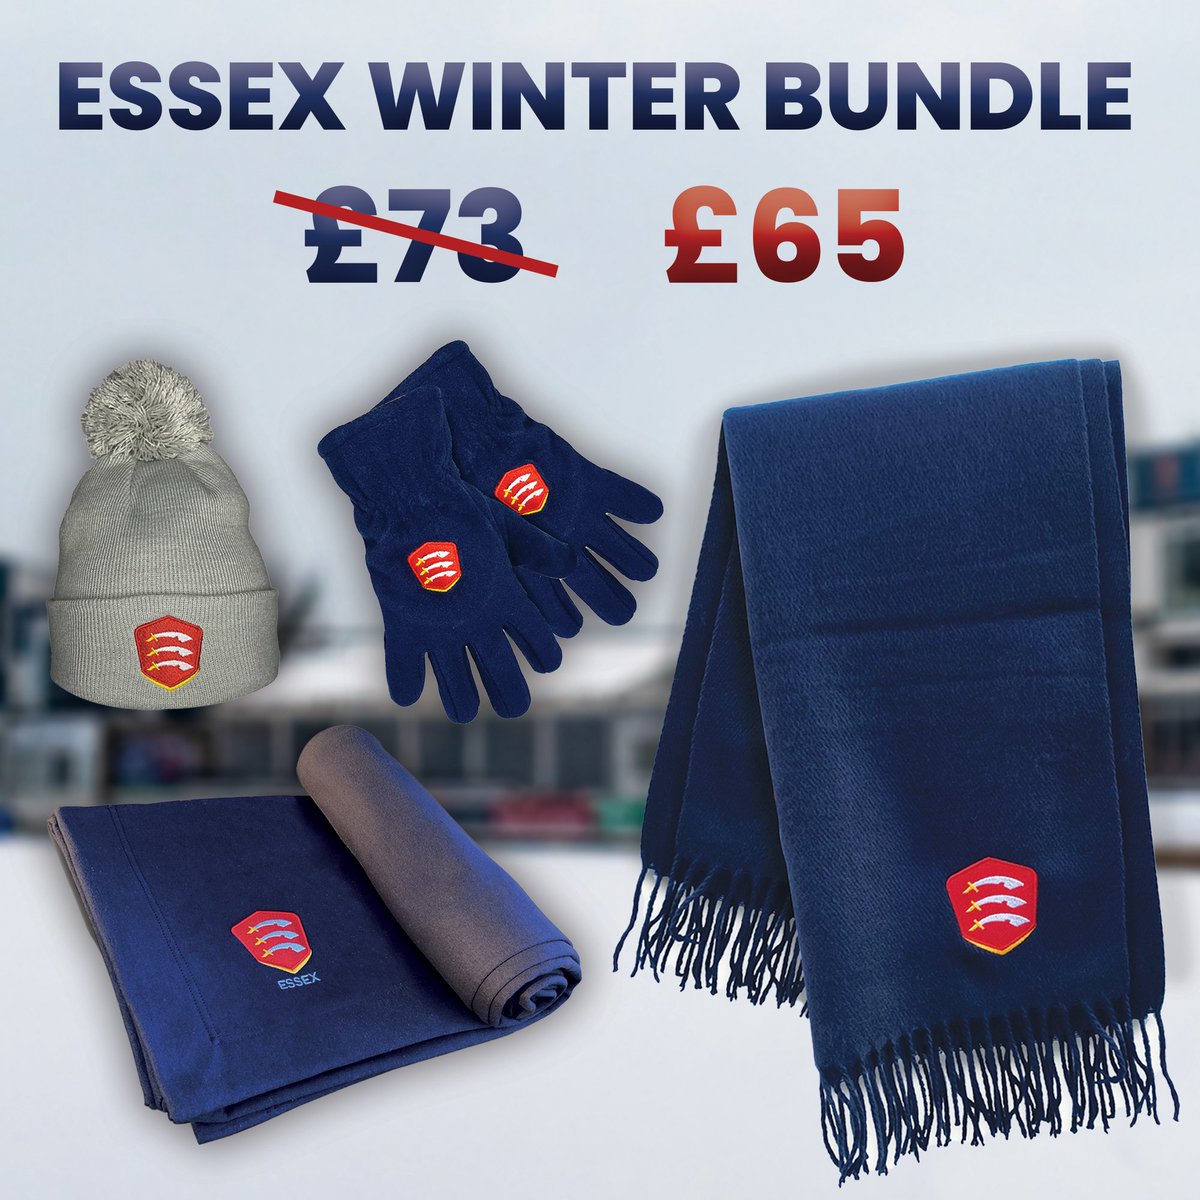 Feeling chilly this winter?❄️ For a limited time only, the Essex Winter Bundle is available in store and online. The bundle includes an Essex bobble hat, blanket, gloves, and a cosy scarf of course!🧥 Shop now in store or online at essexcricketshop.co.uk🛒